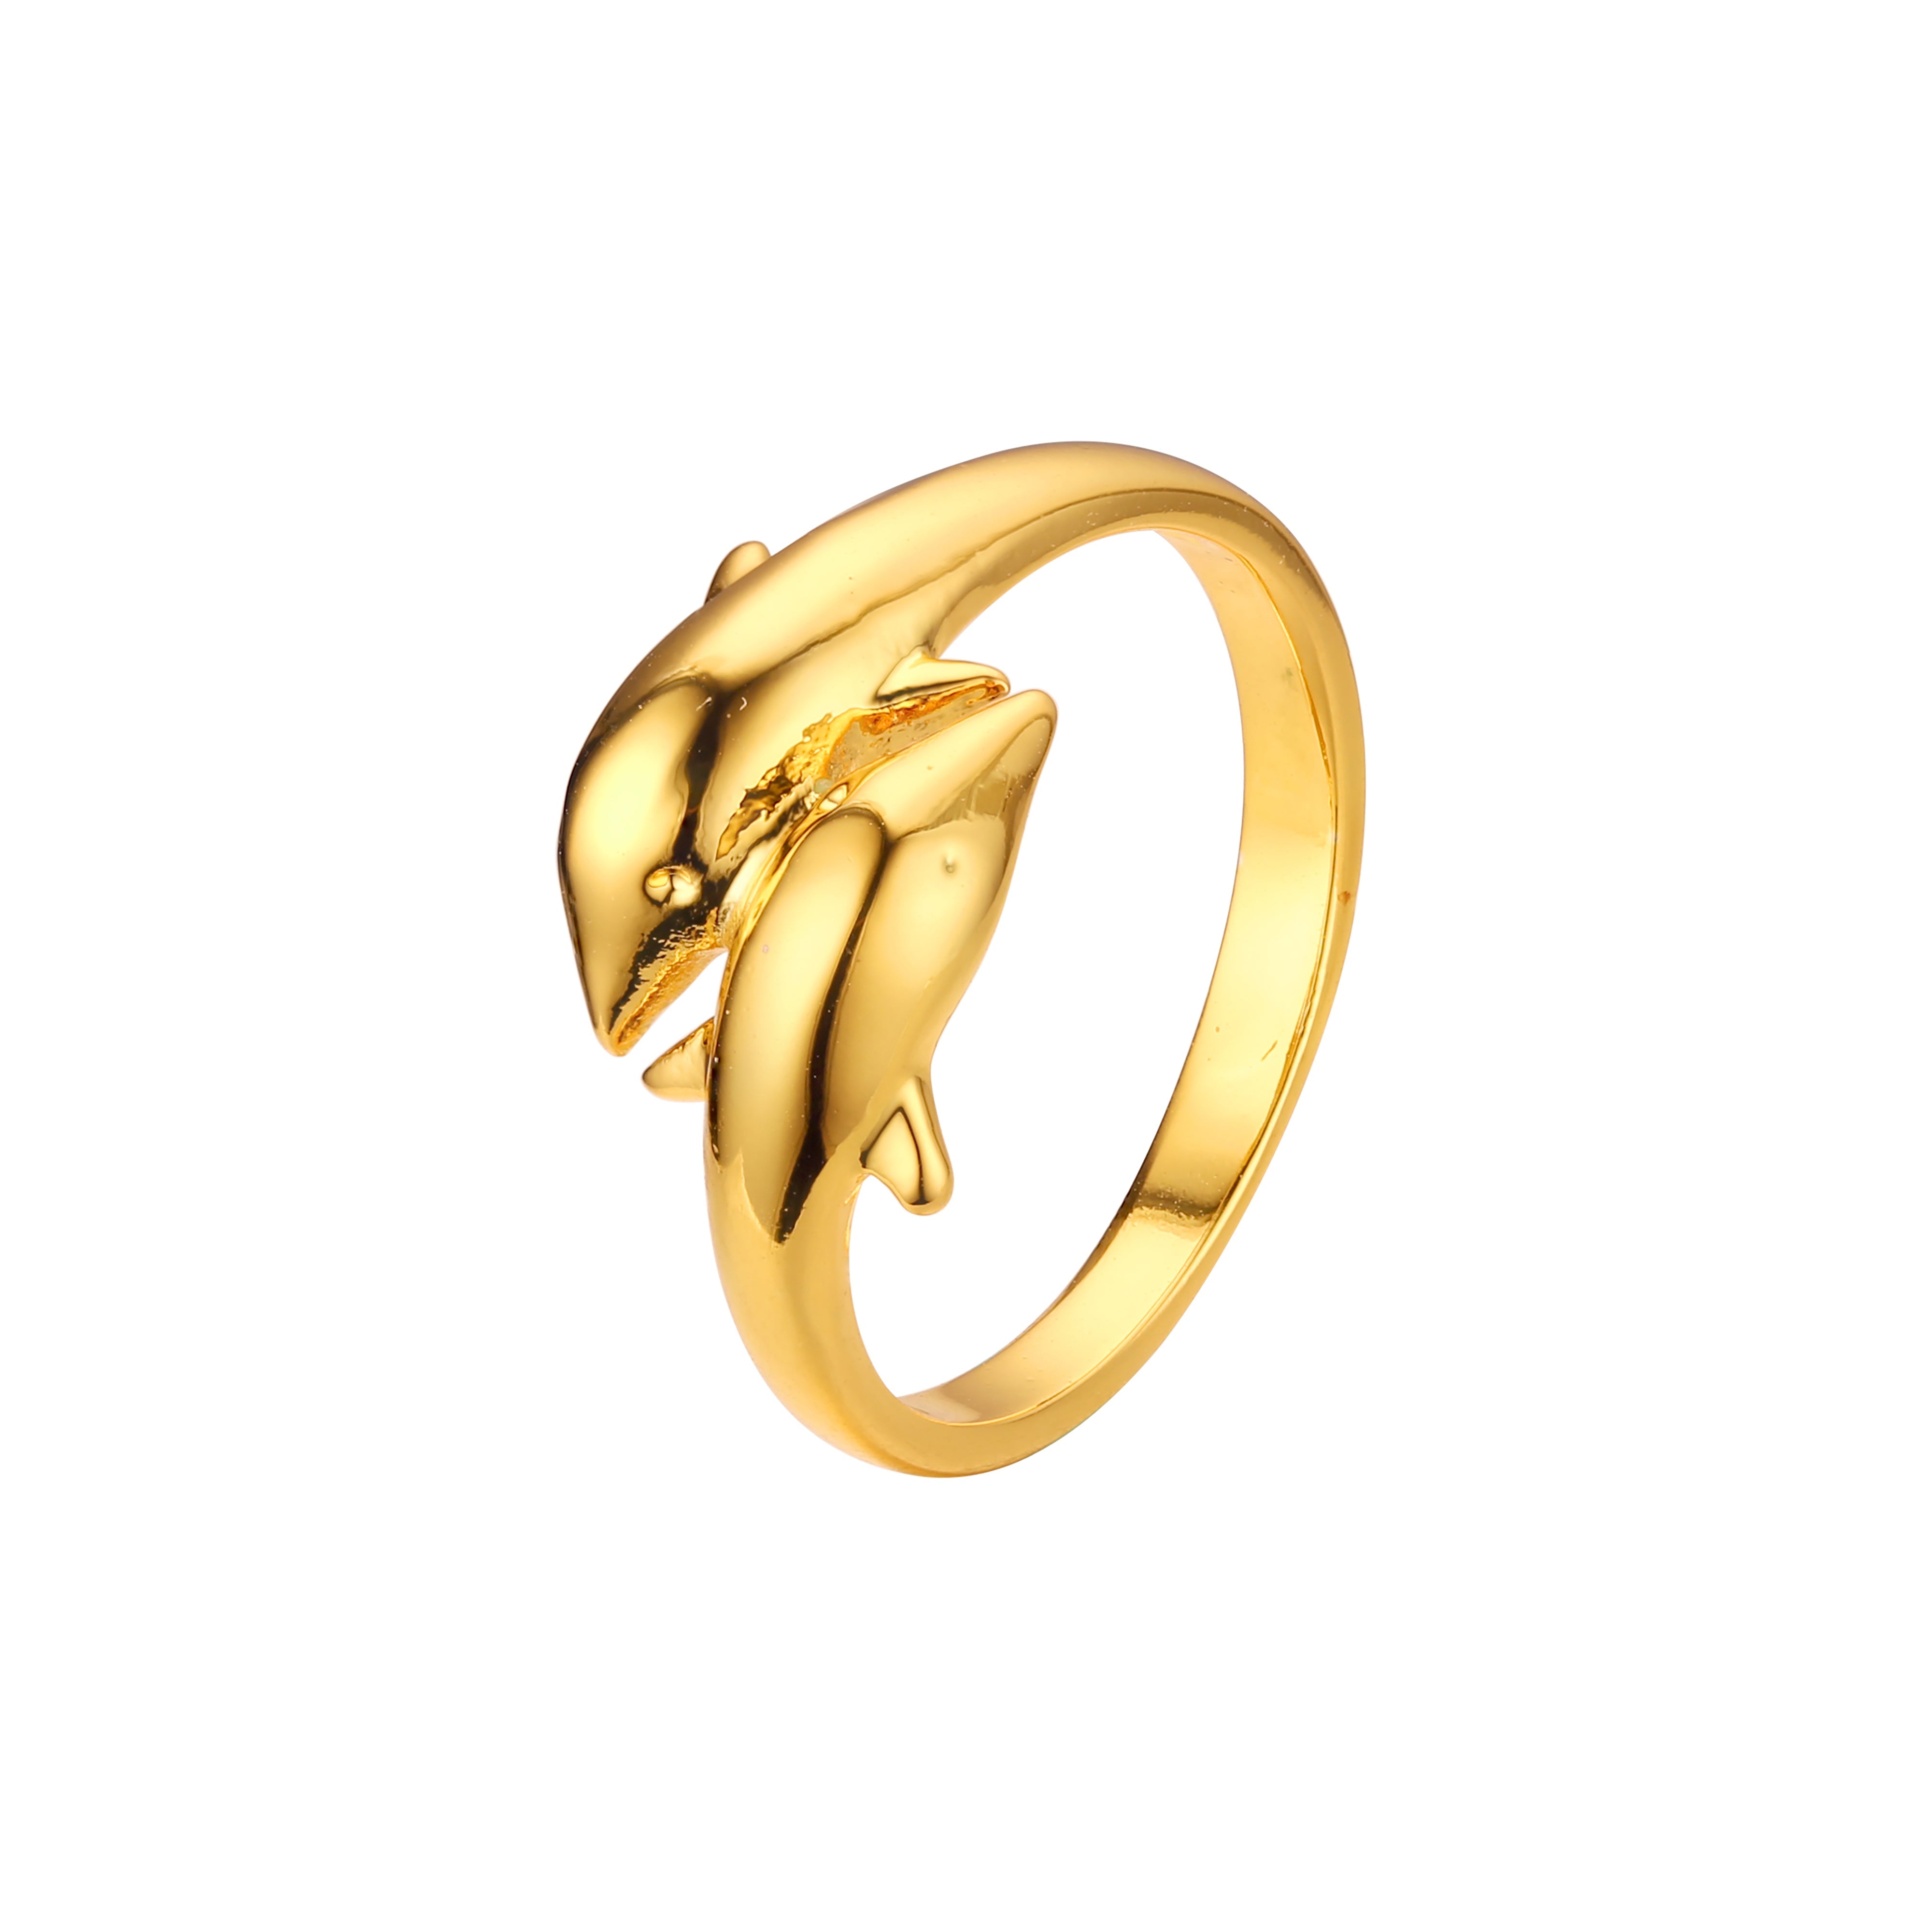 Double dolphin rings in 18K Gold, Rose Gold plating colors